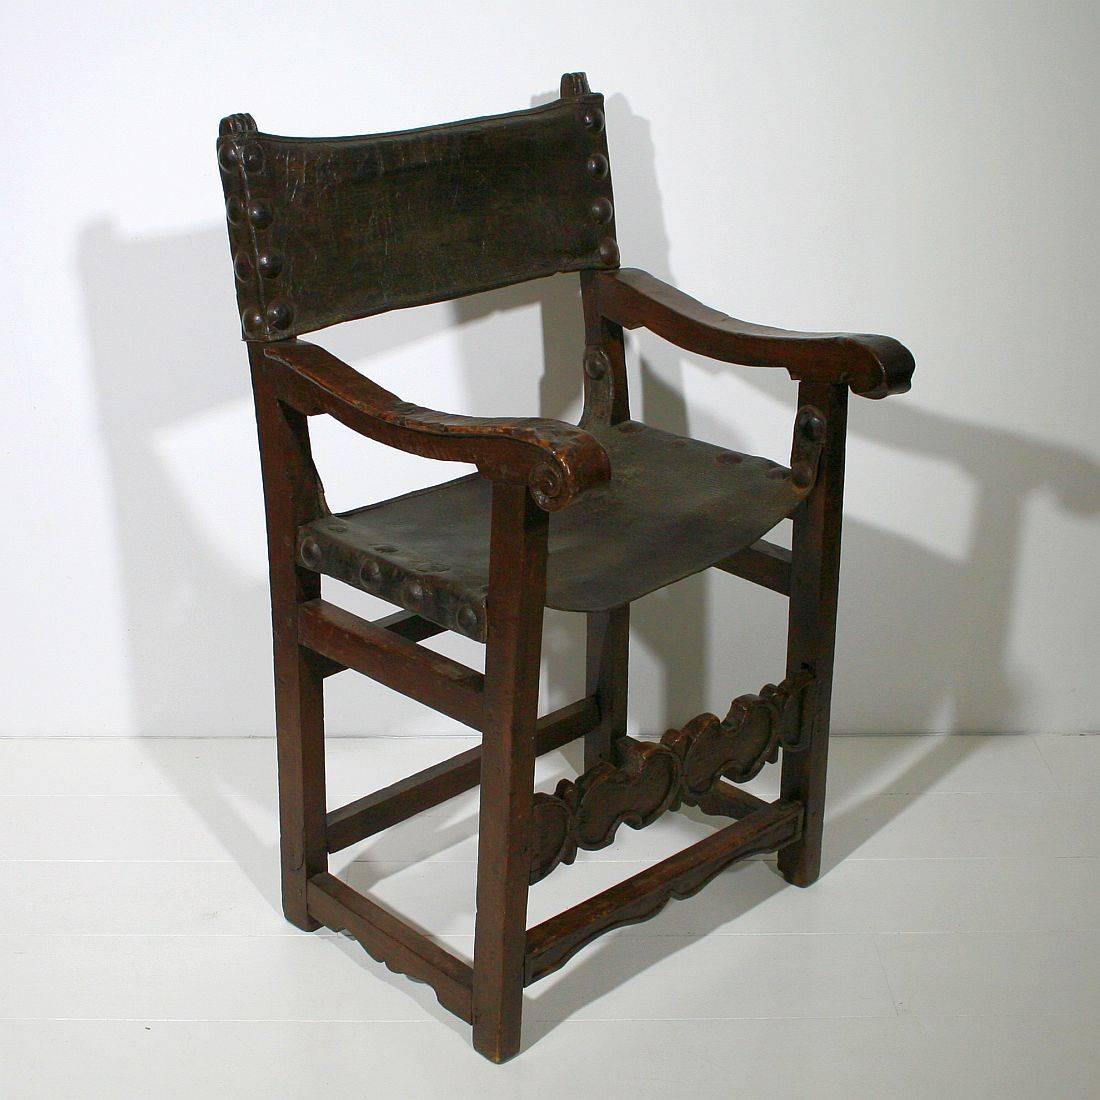 Spectacular Renaissance chair with original leather seating and back. Unique piece in relative good condition, France, circa 1600-1650
Weathered, small losses and old repairs.